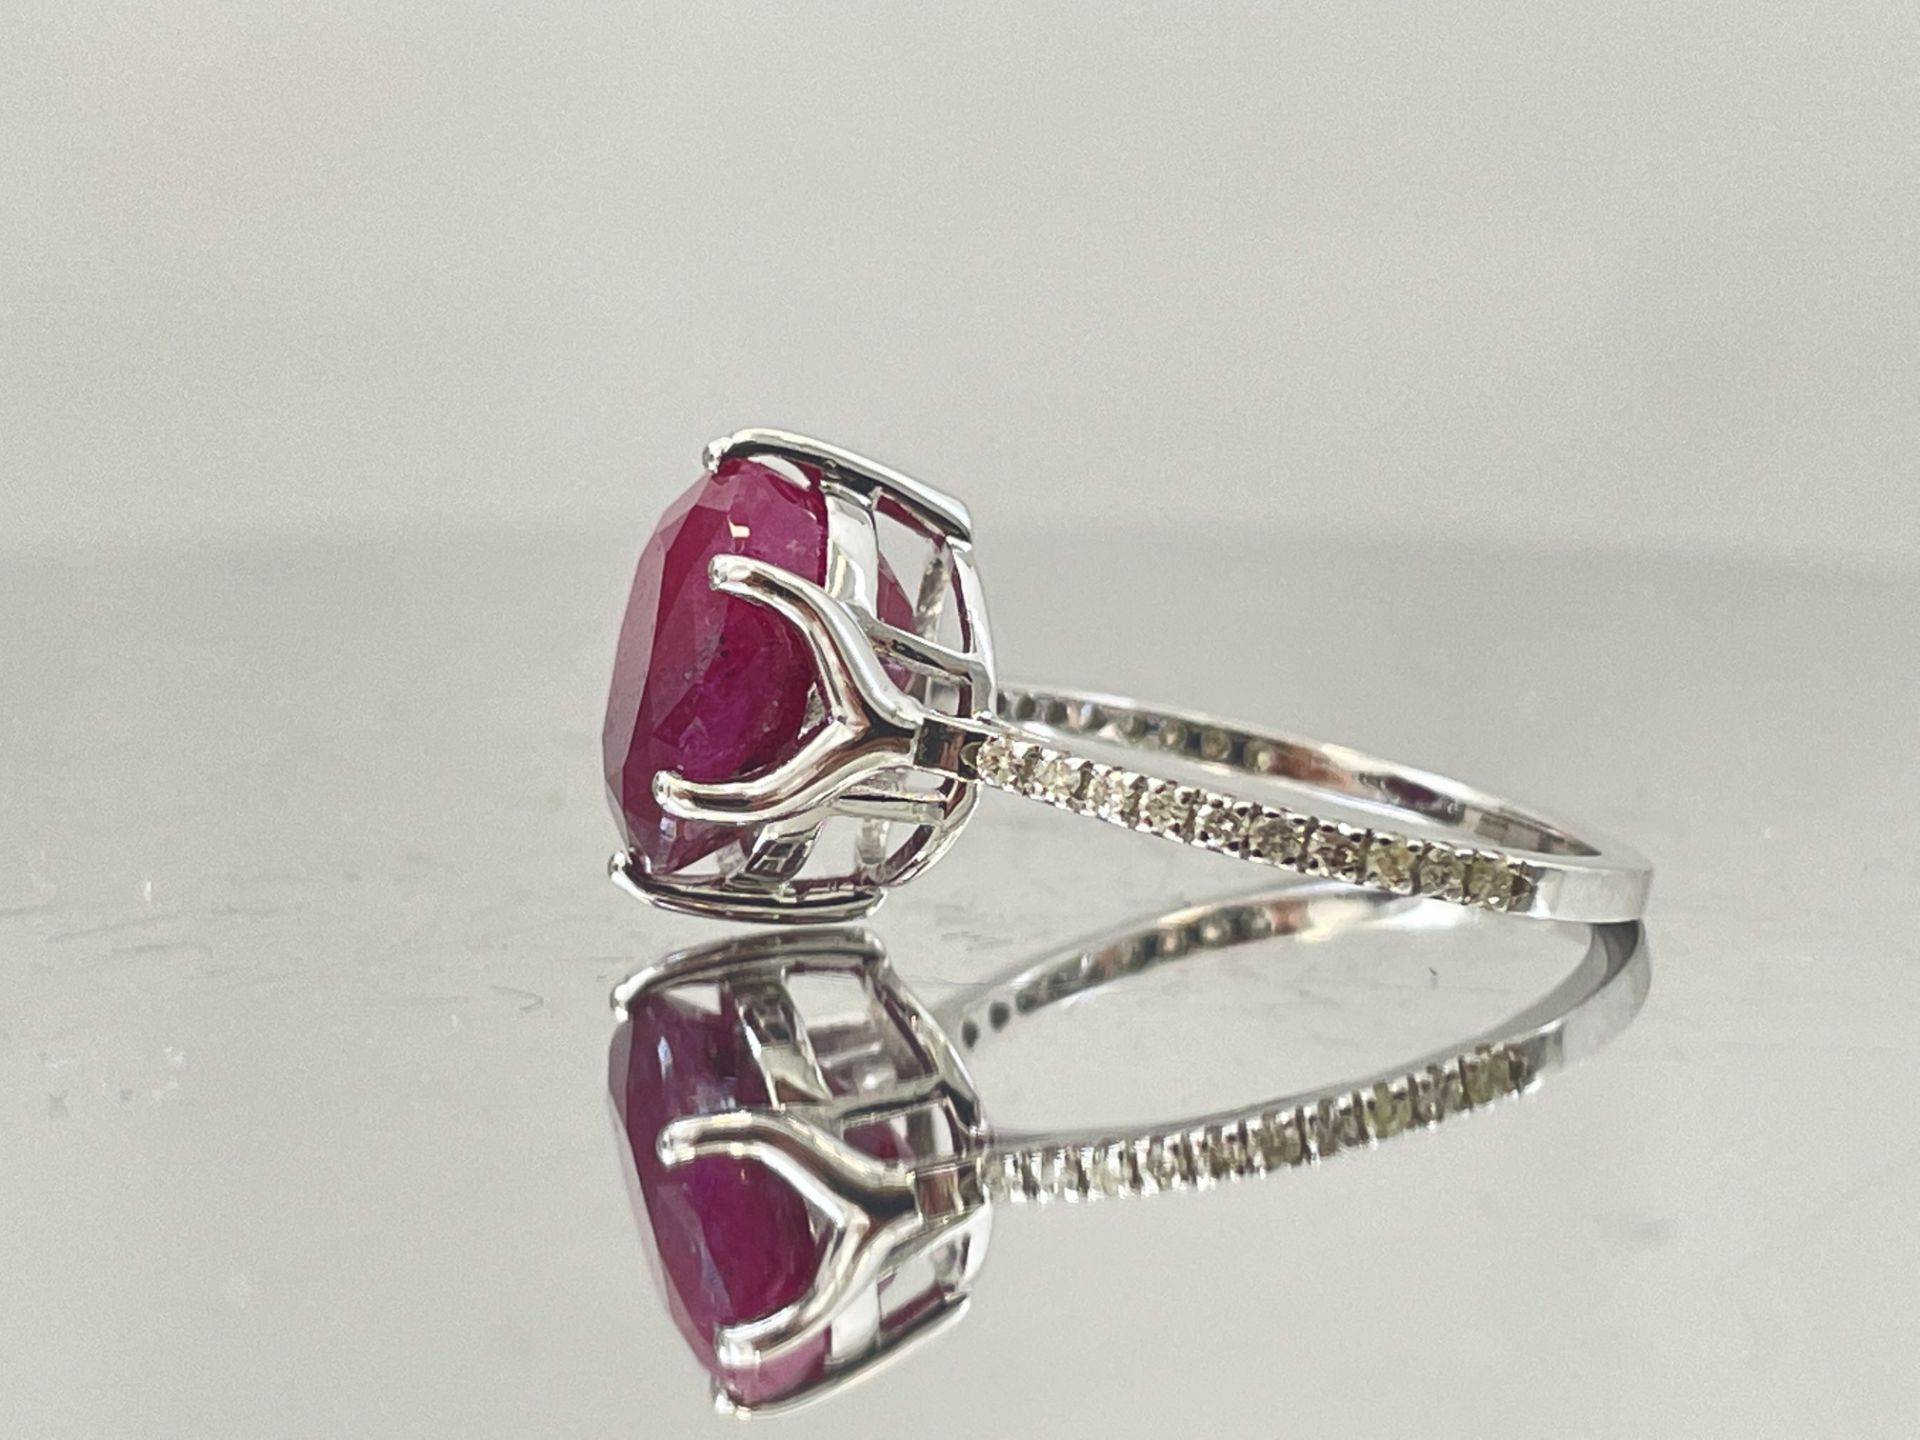 Natural Burma RubyUnheated/Untreated 6.19 Ct With Natural Diamonds & 18kGold - Image 3 of 5